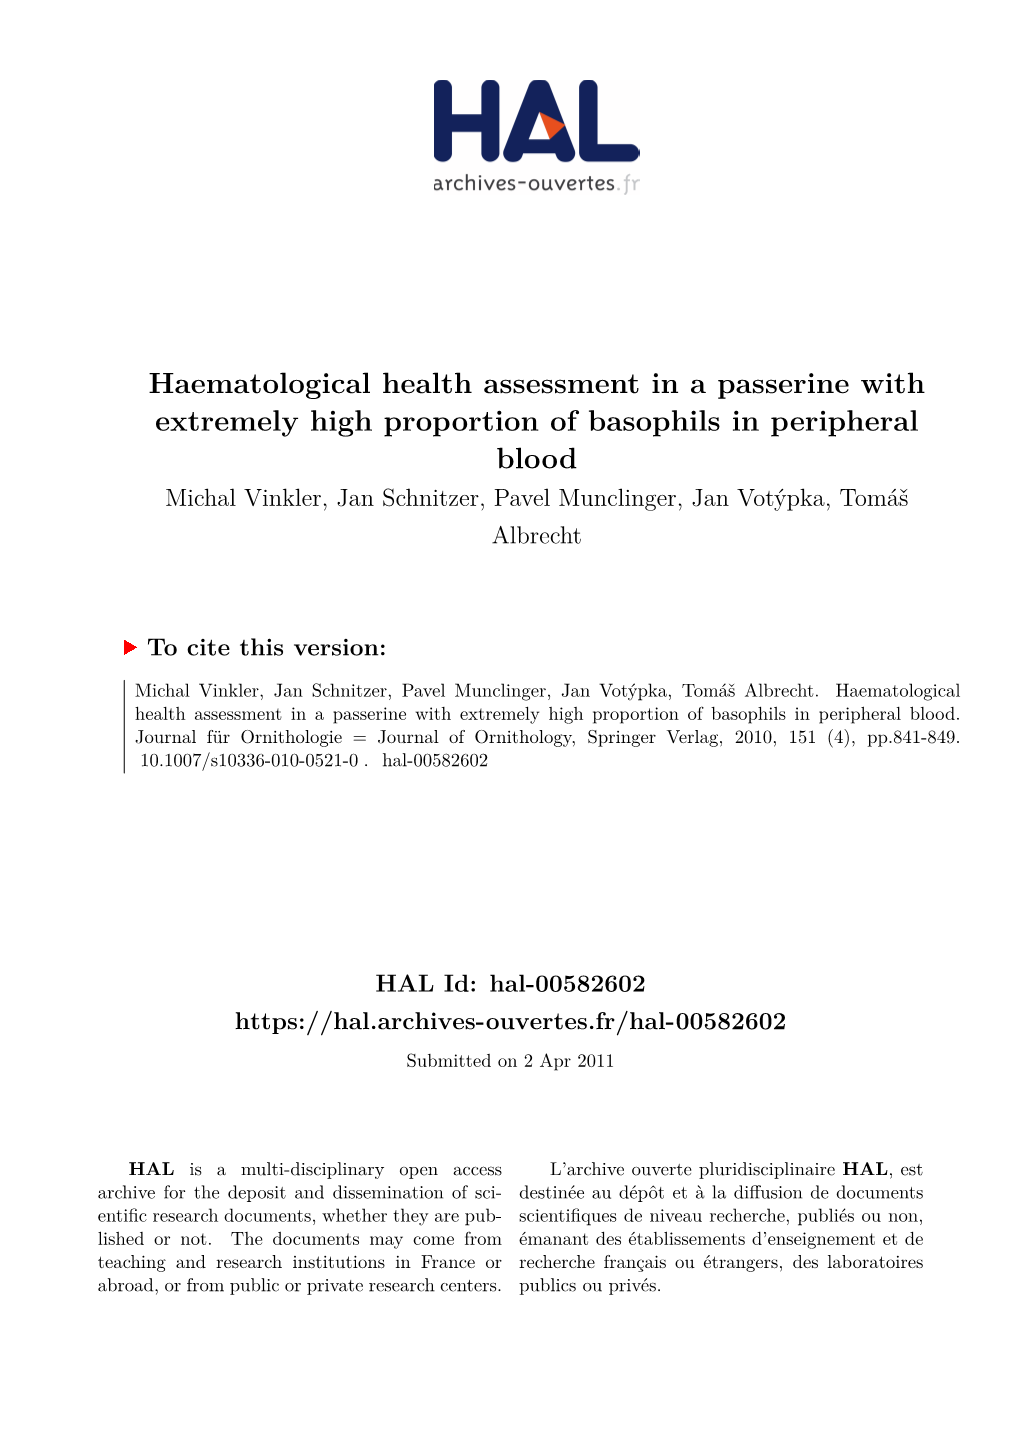 Haematological Health Assessment in a Passerine with Extremely High